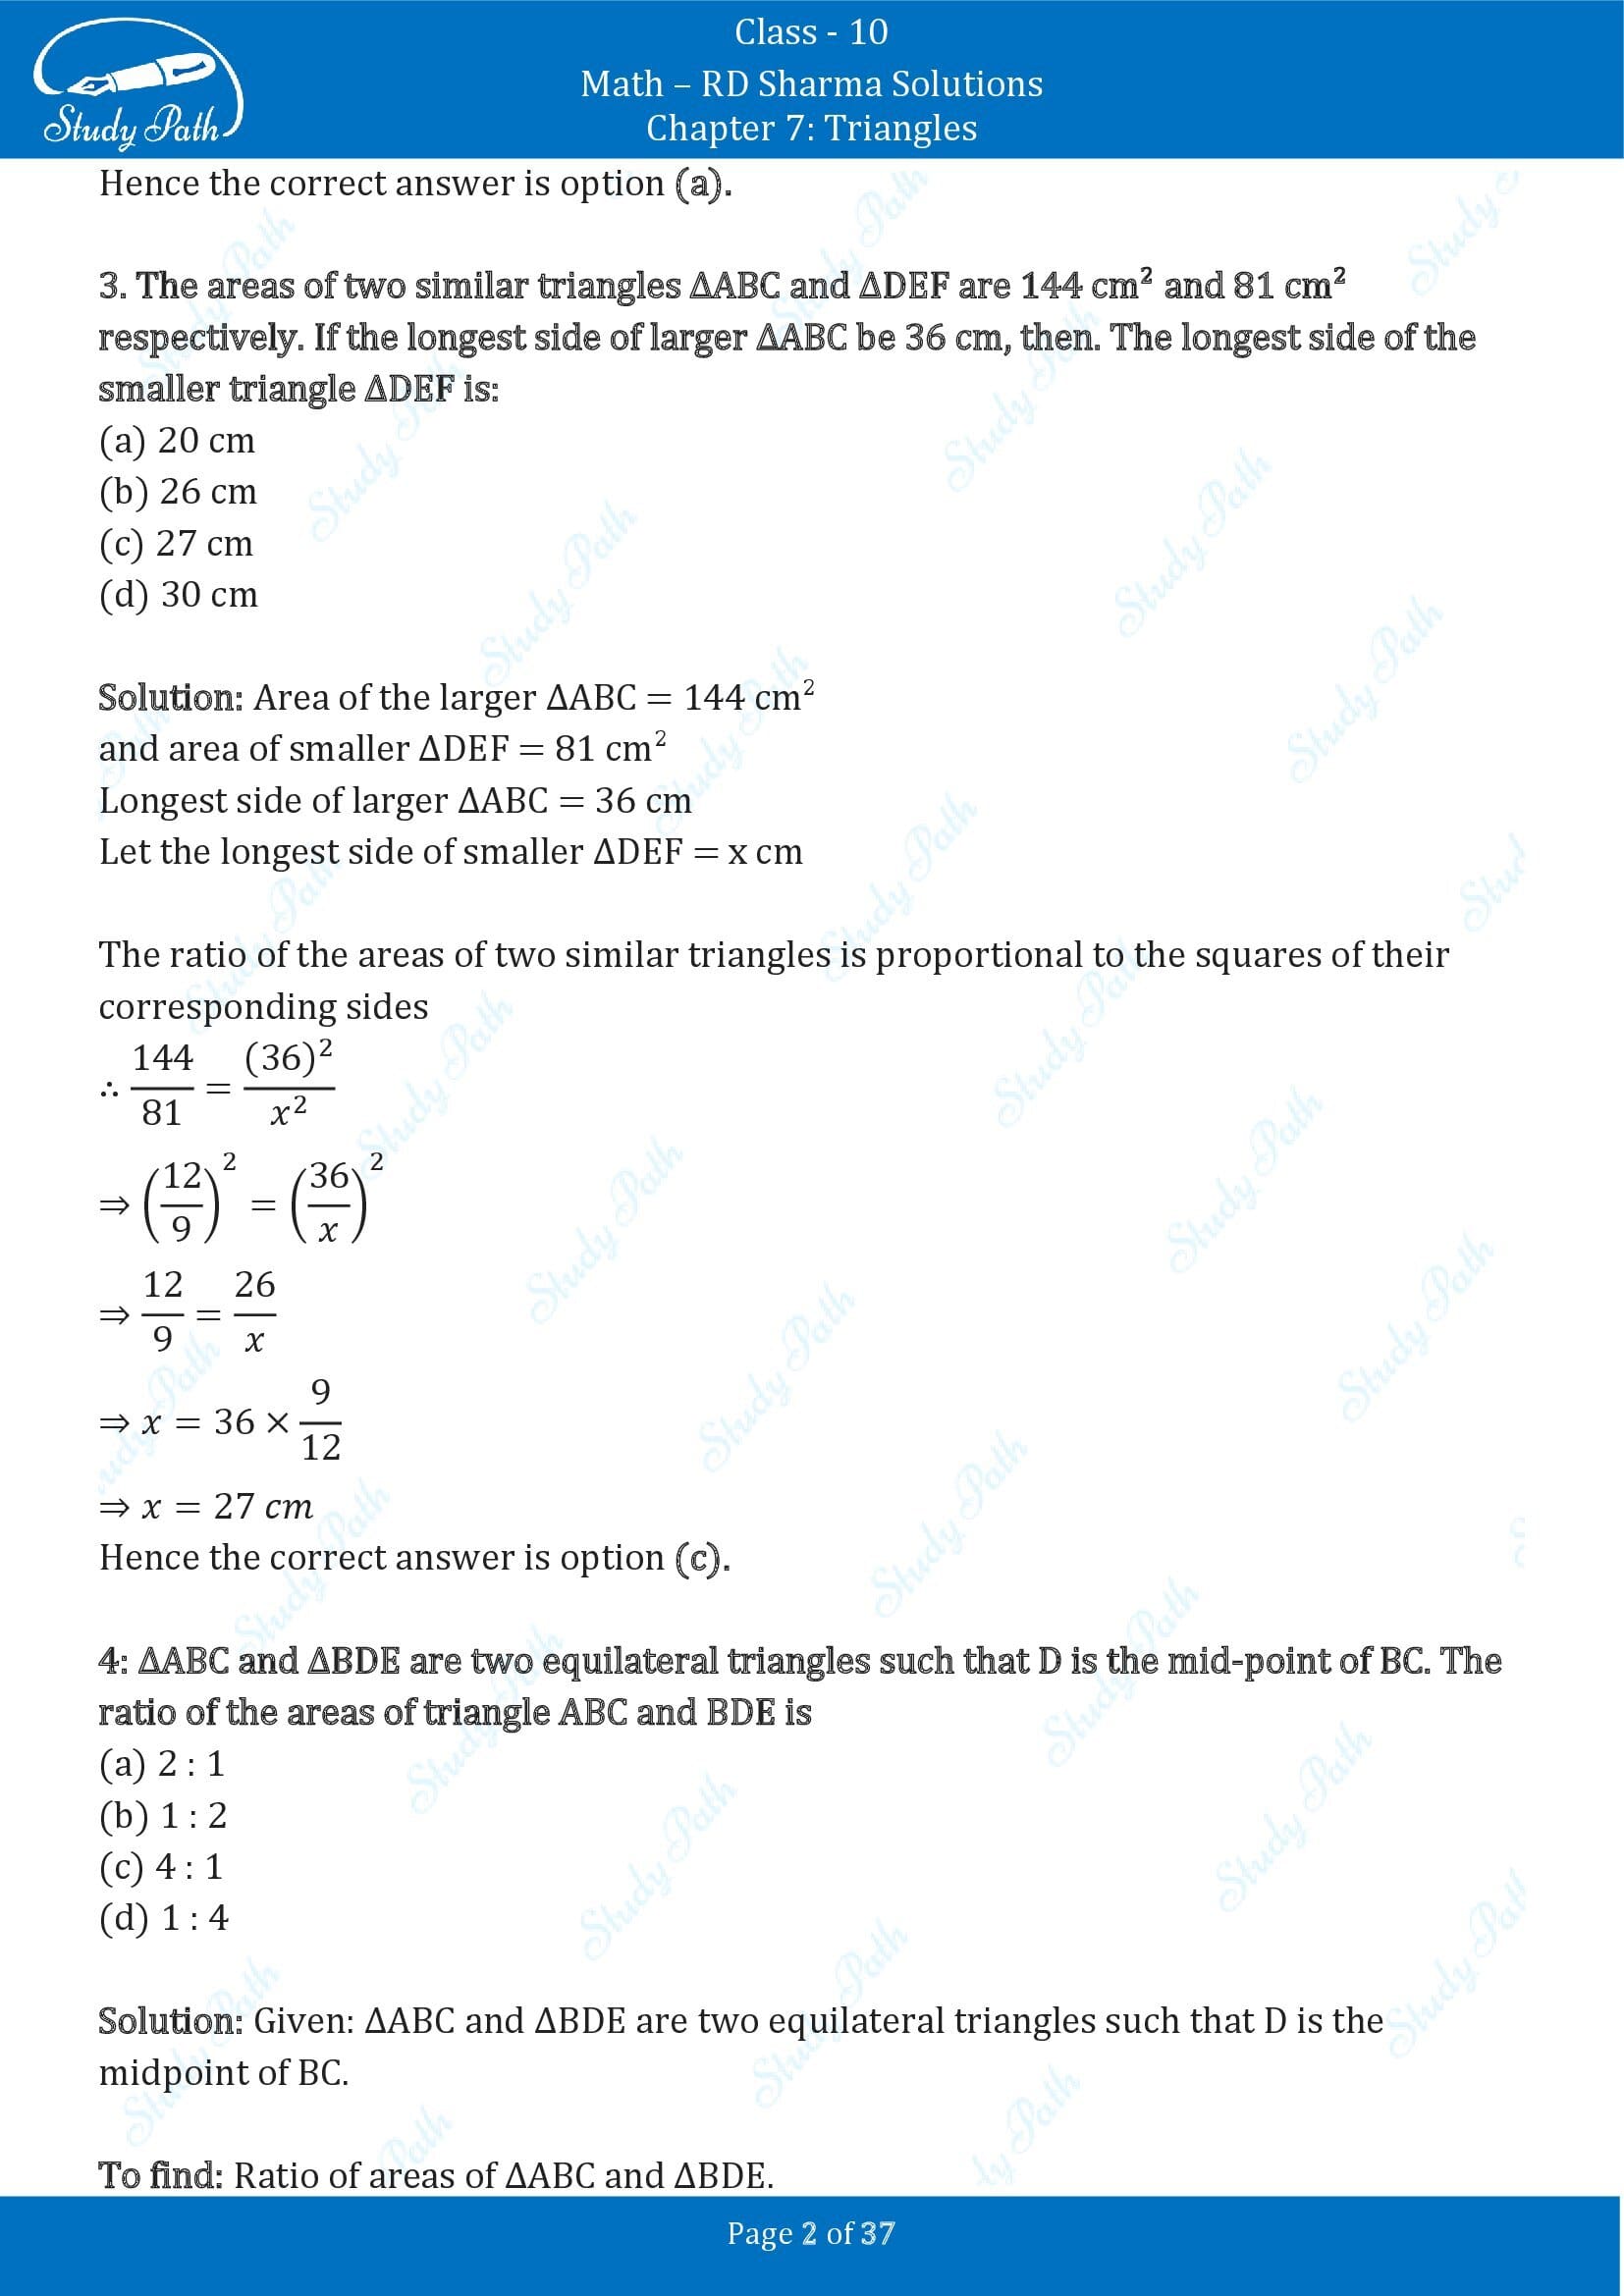 RD Sharma Solutions Class 10 Chapter 7 Triangles Multiple Choice Question MCQs 00002